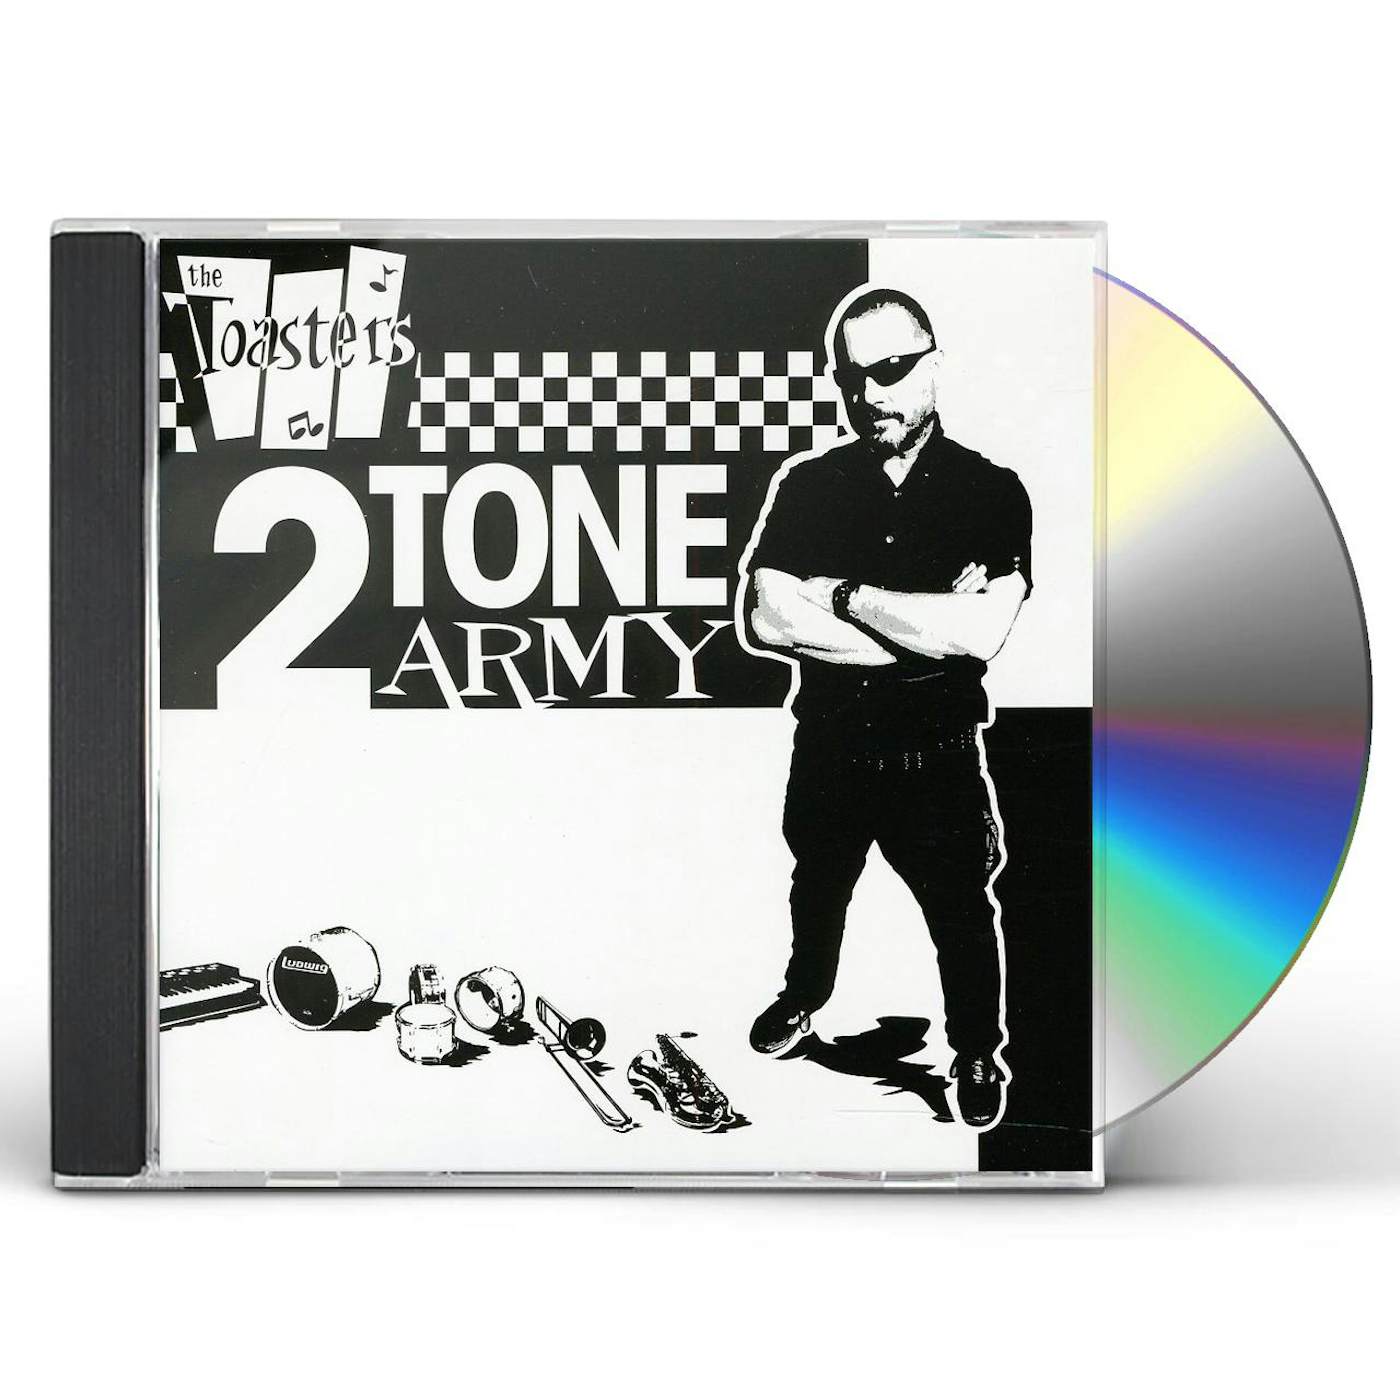 The Toasters 2TONE ARMY CD